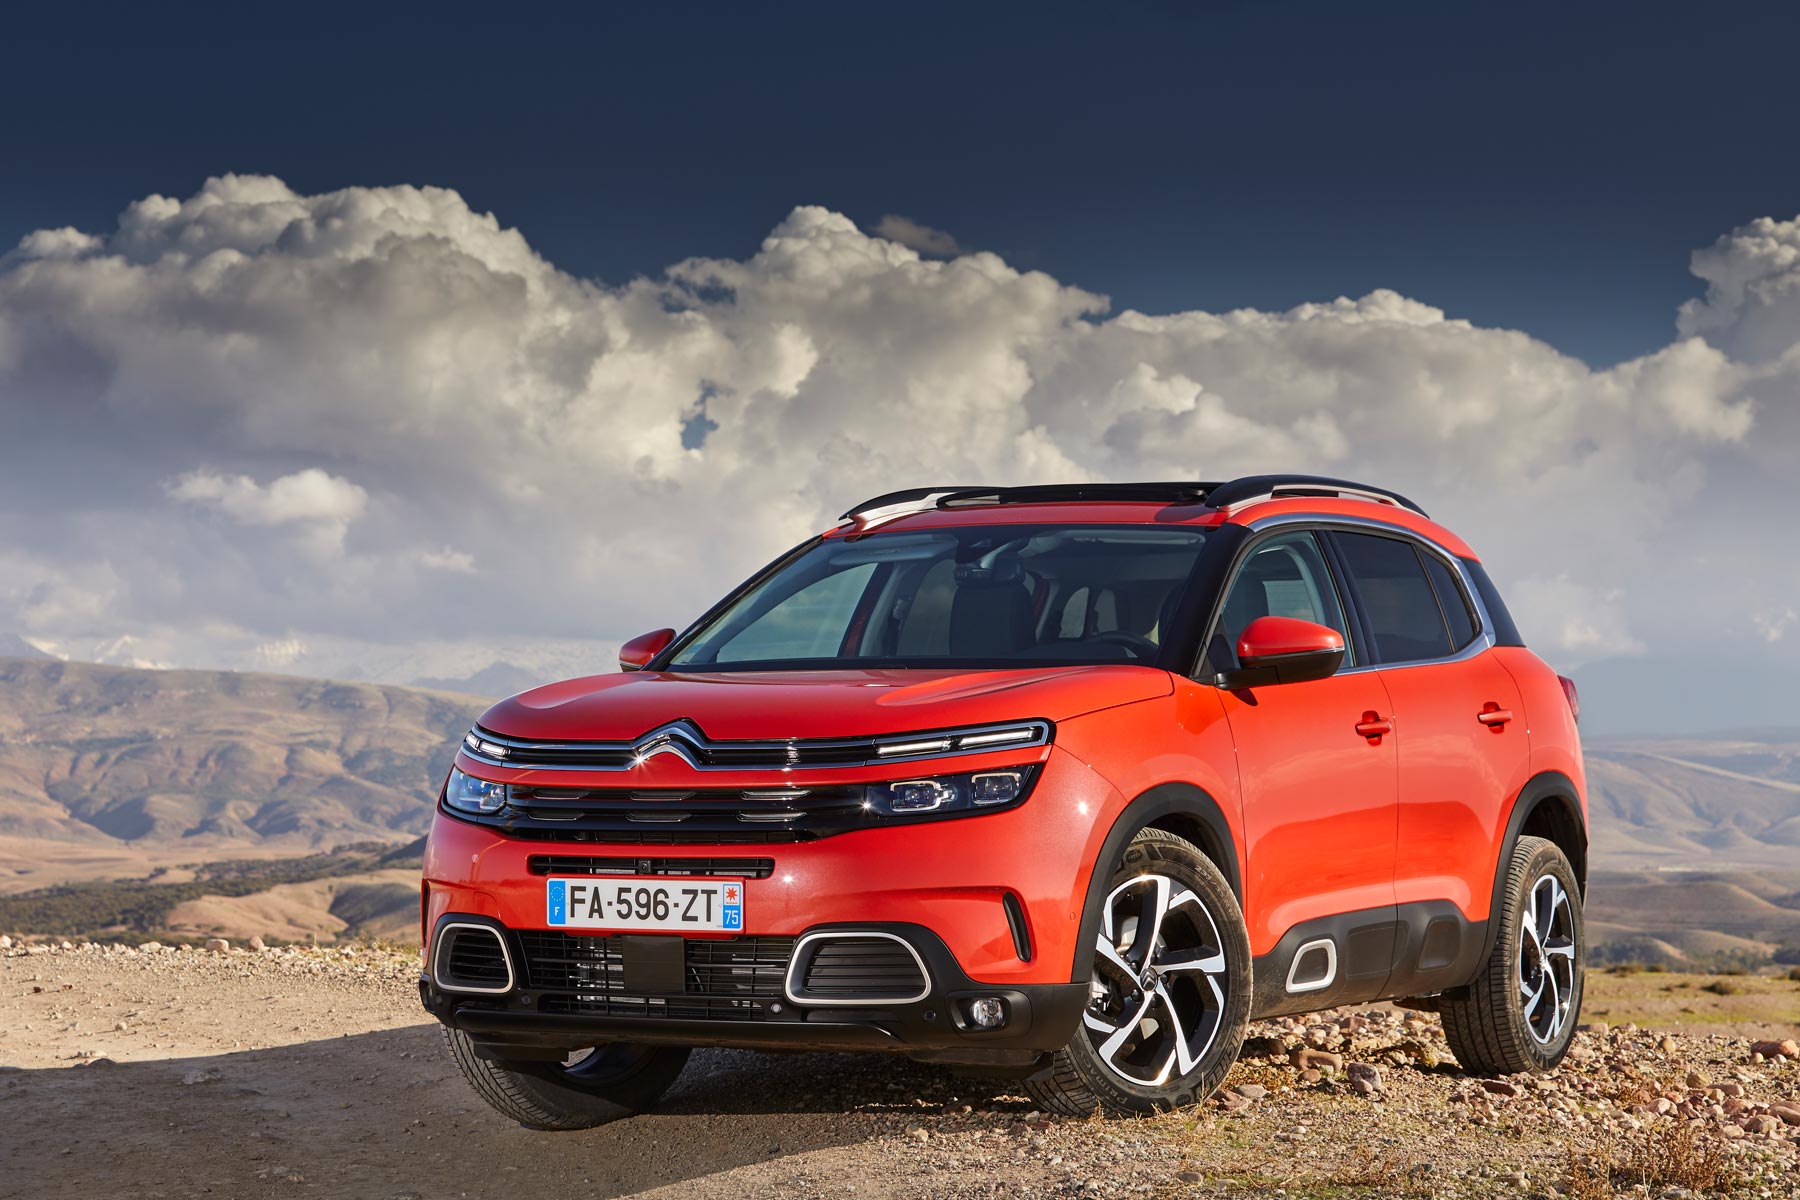 19 Citroen C5 Aircross Review Quirky Crossover Plays The Comfort Card